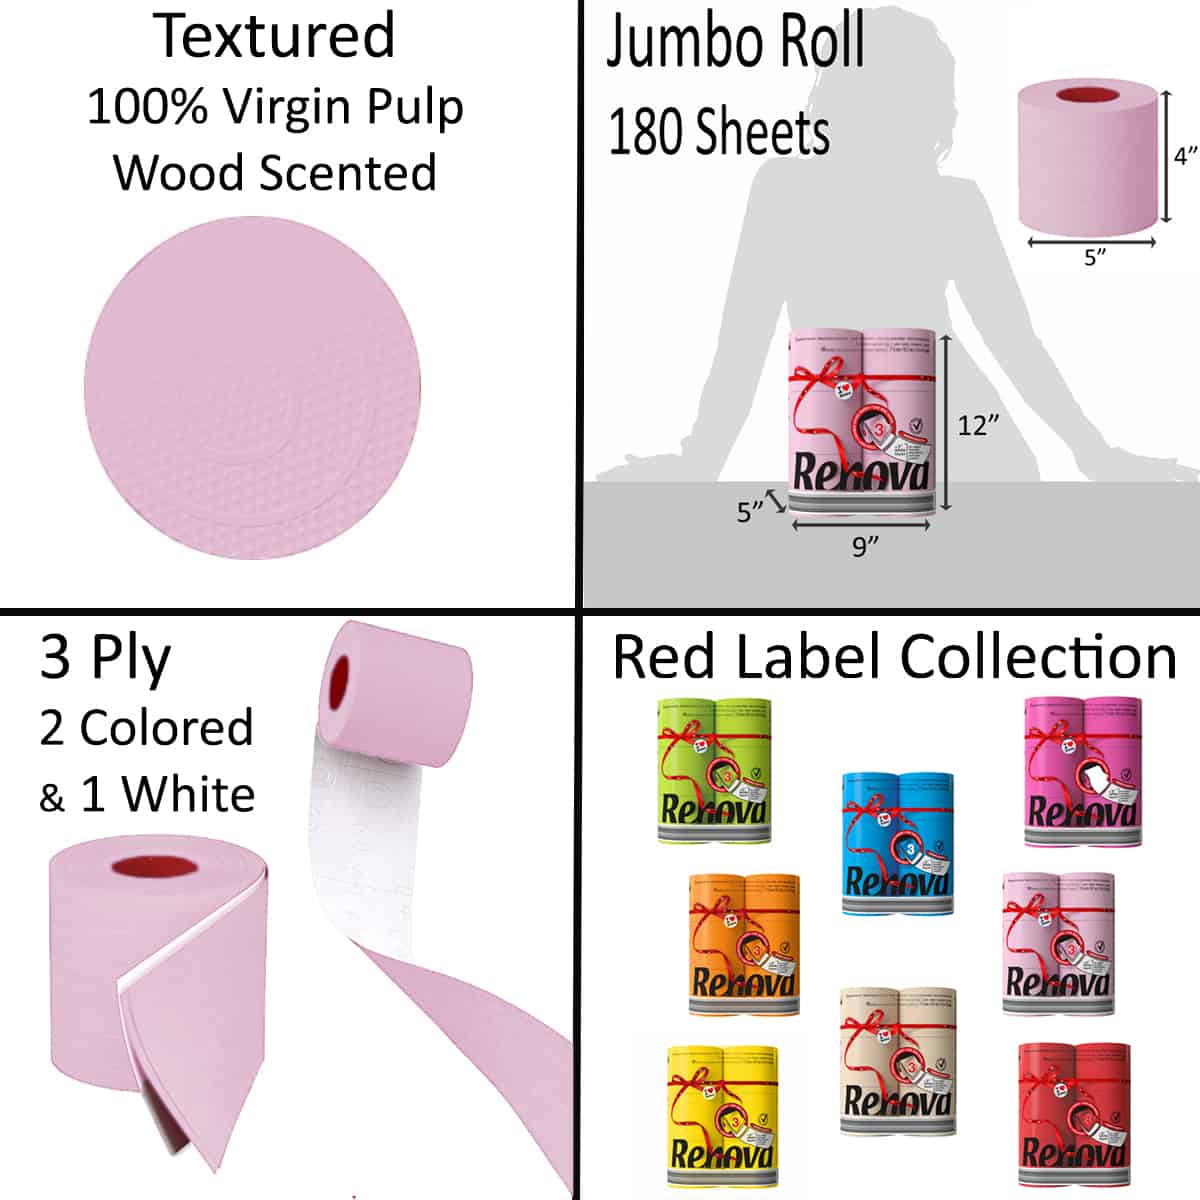 Luxury Scented Colored Toilet Paper 6 Jumbo Rolls 3-Ply-180 Sheets-Pallet 270 packs-1620R